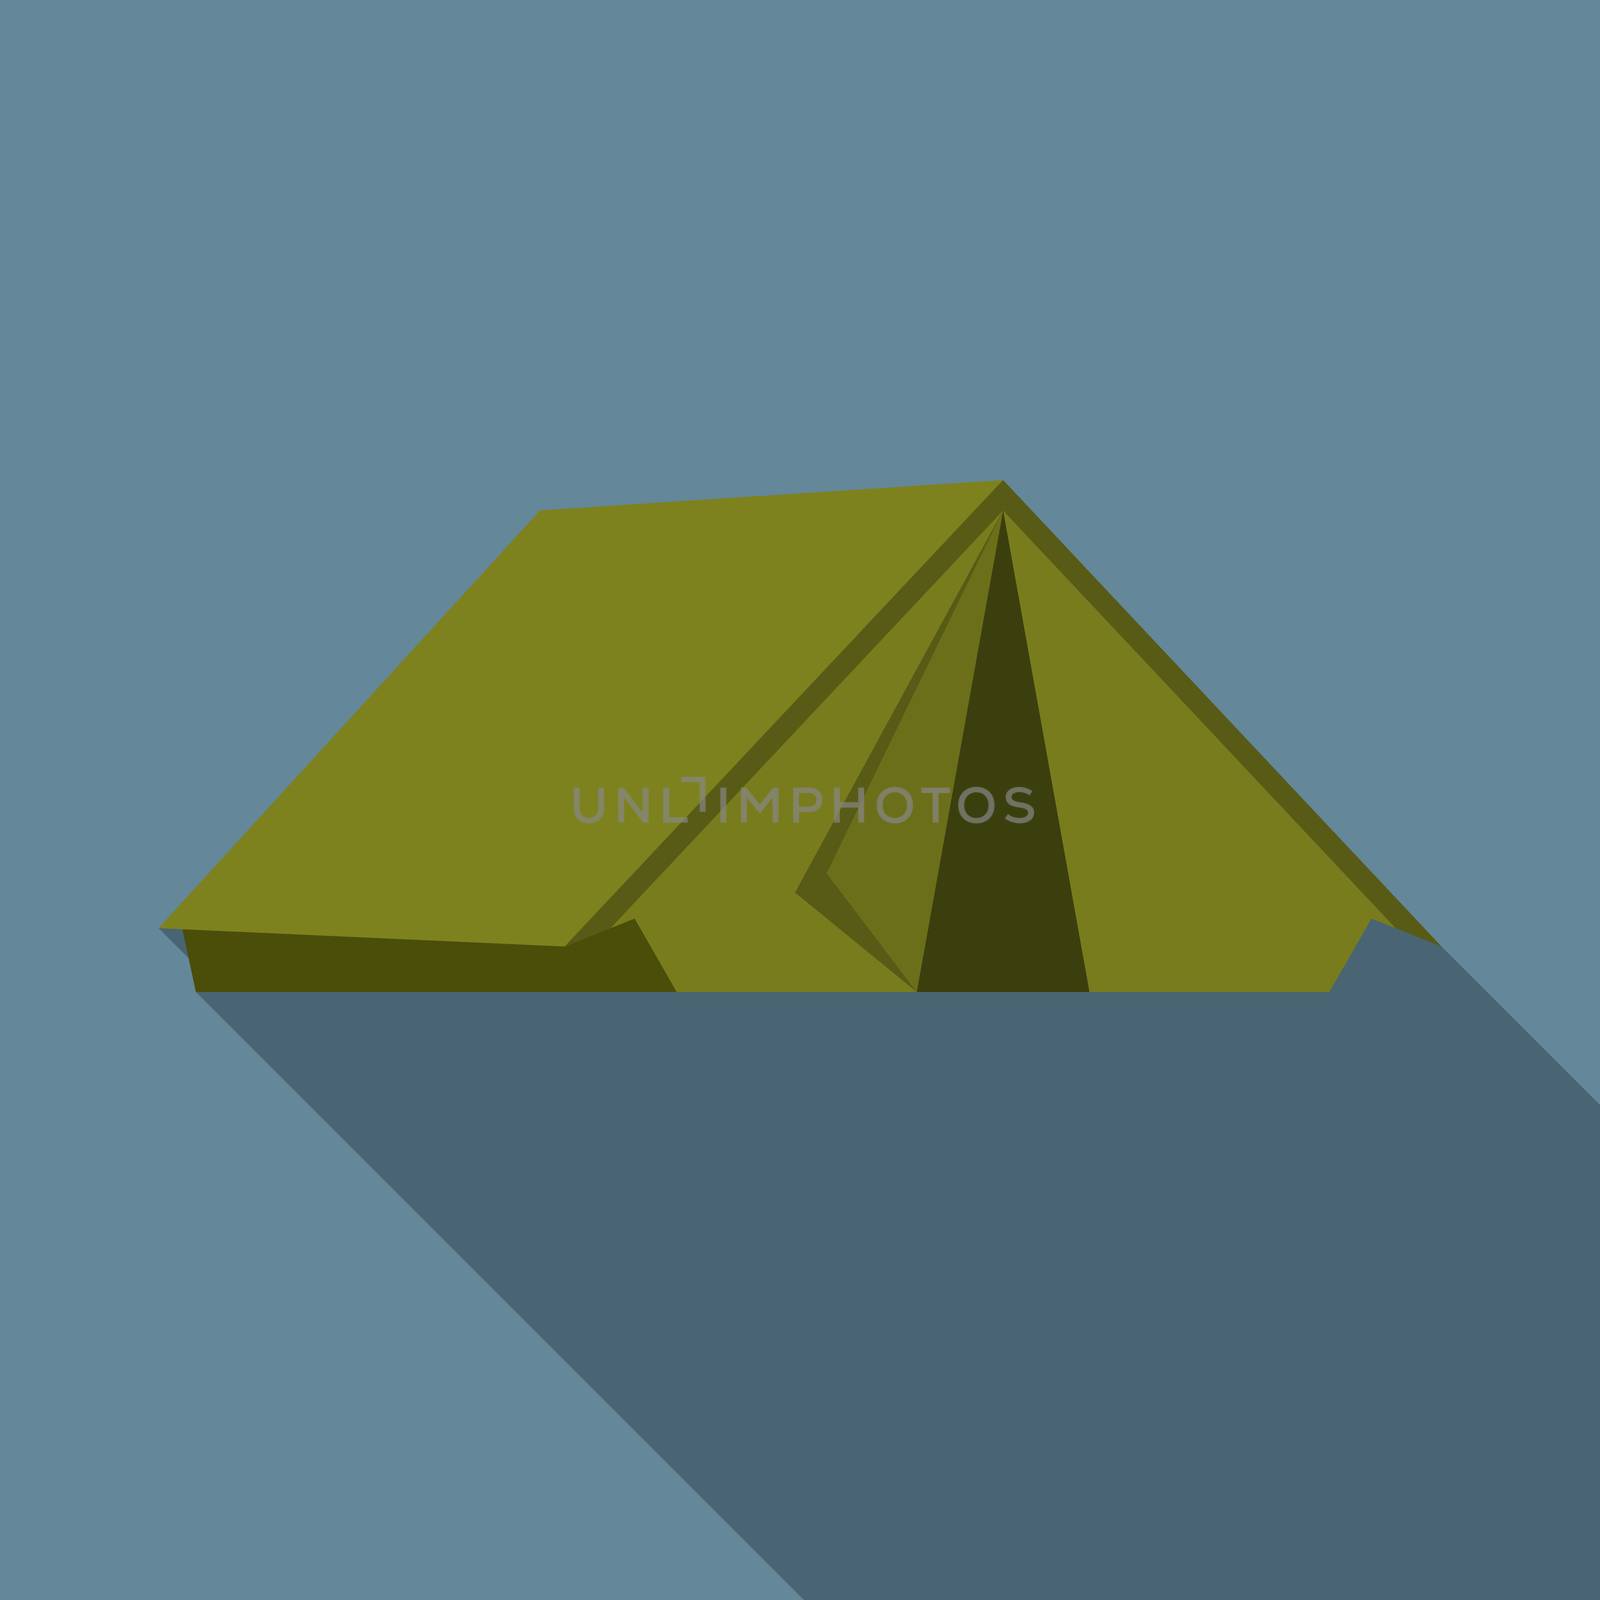 Flat design modern vector illustration of tent icon, camping and hiking equipment with long shadow by Lemon_workshop